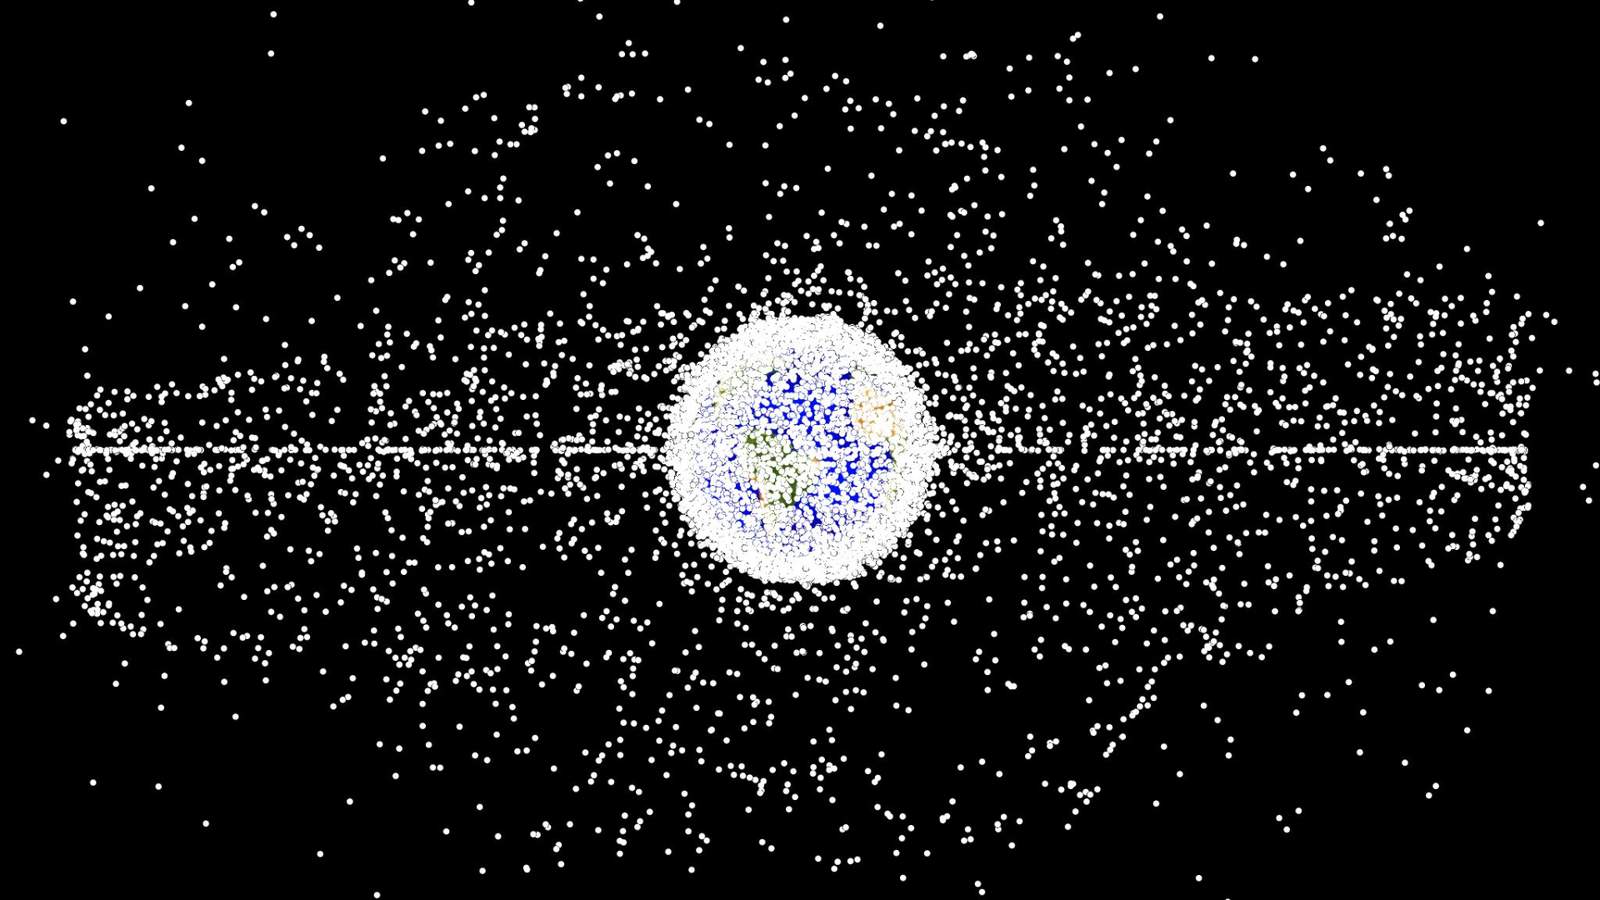 Who takes out the space trash? Space debris is growing, here’s what’s being done about it